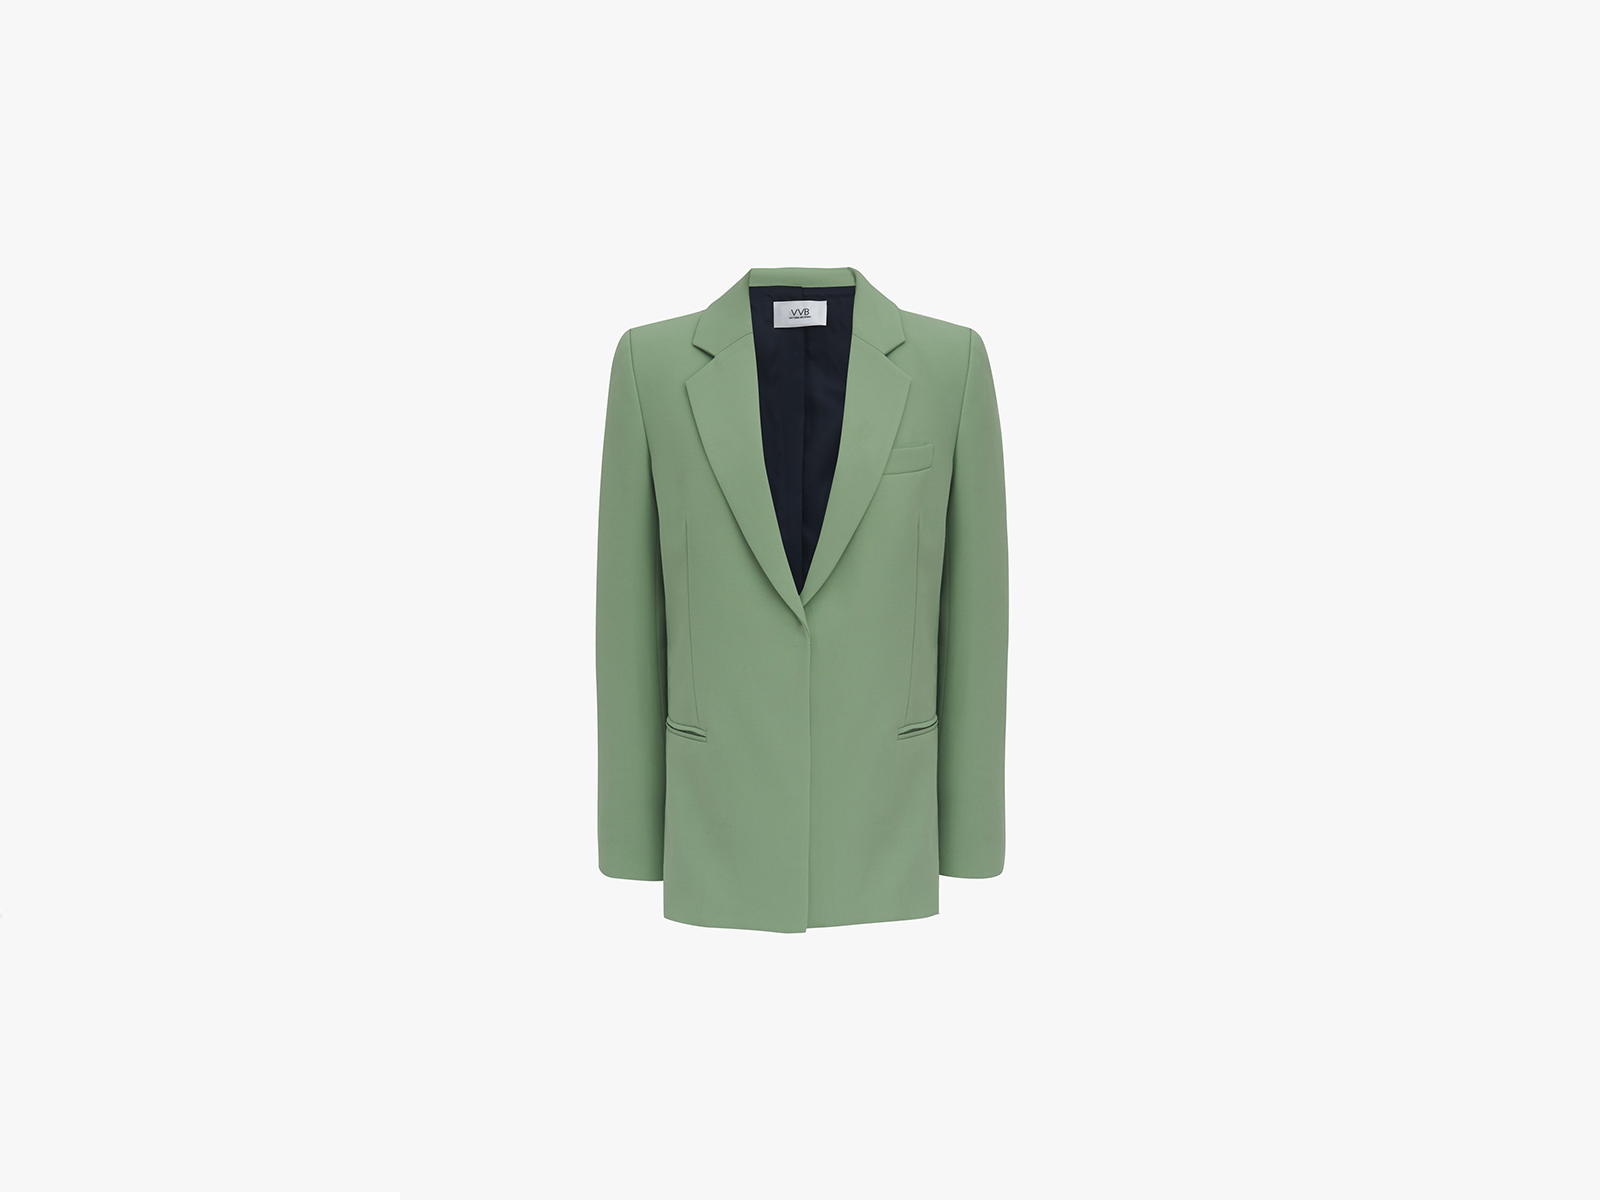 Victoria Victoria Beckham Fitted Tailored Jacket in Pistachio